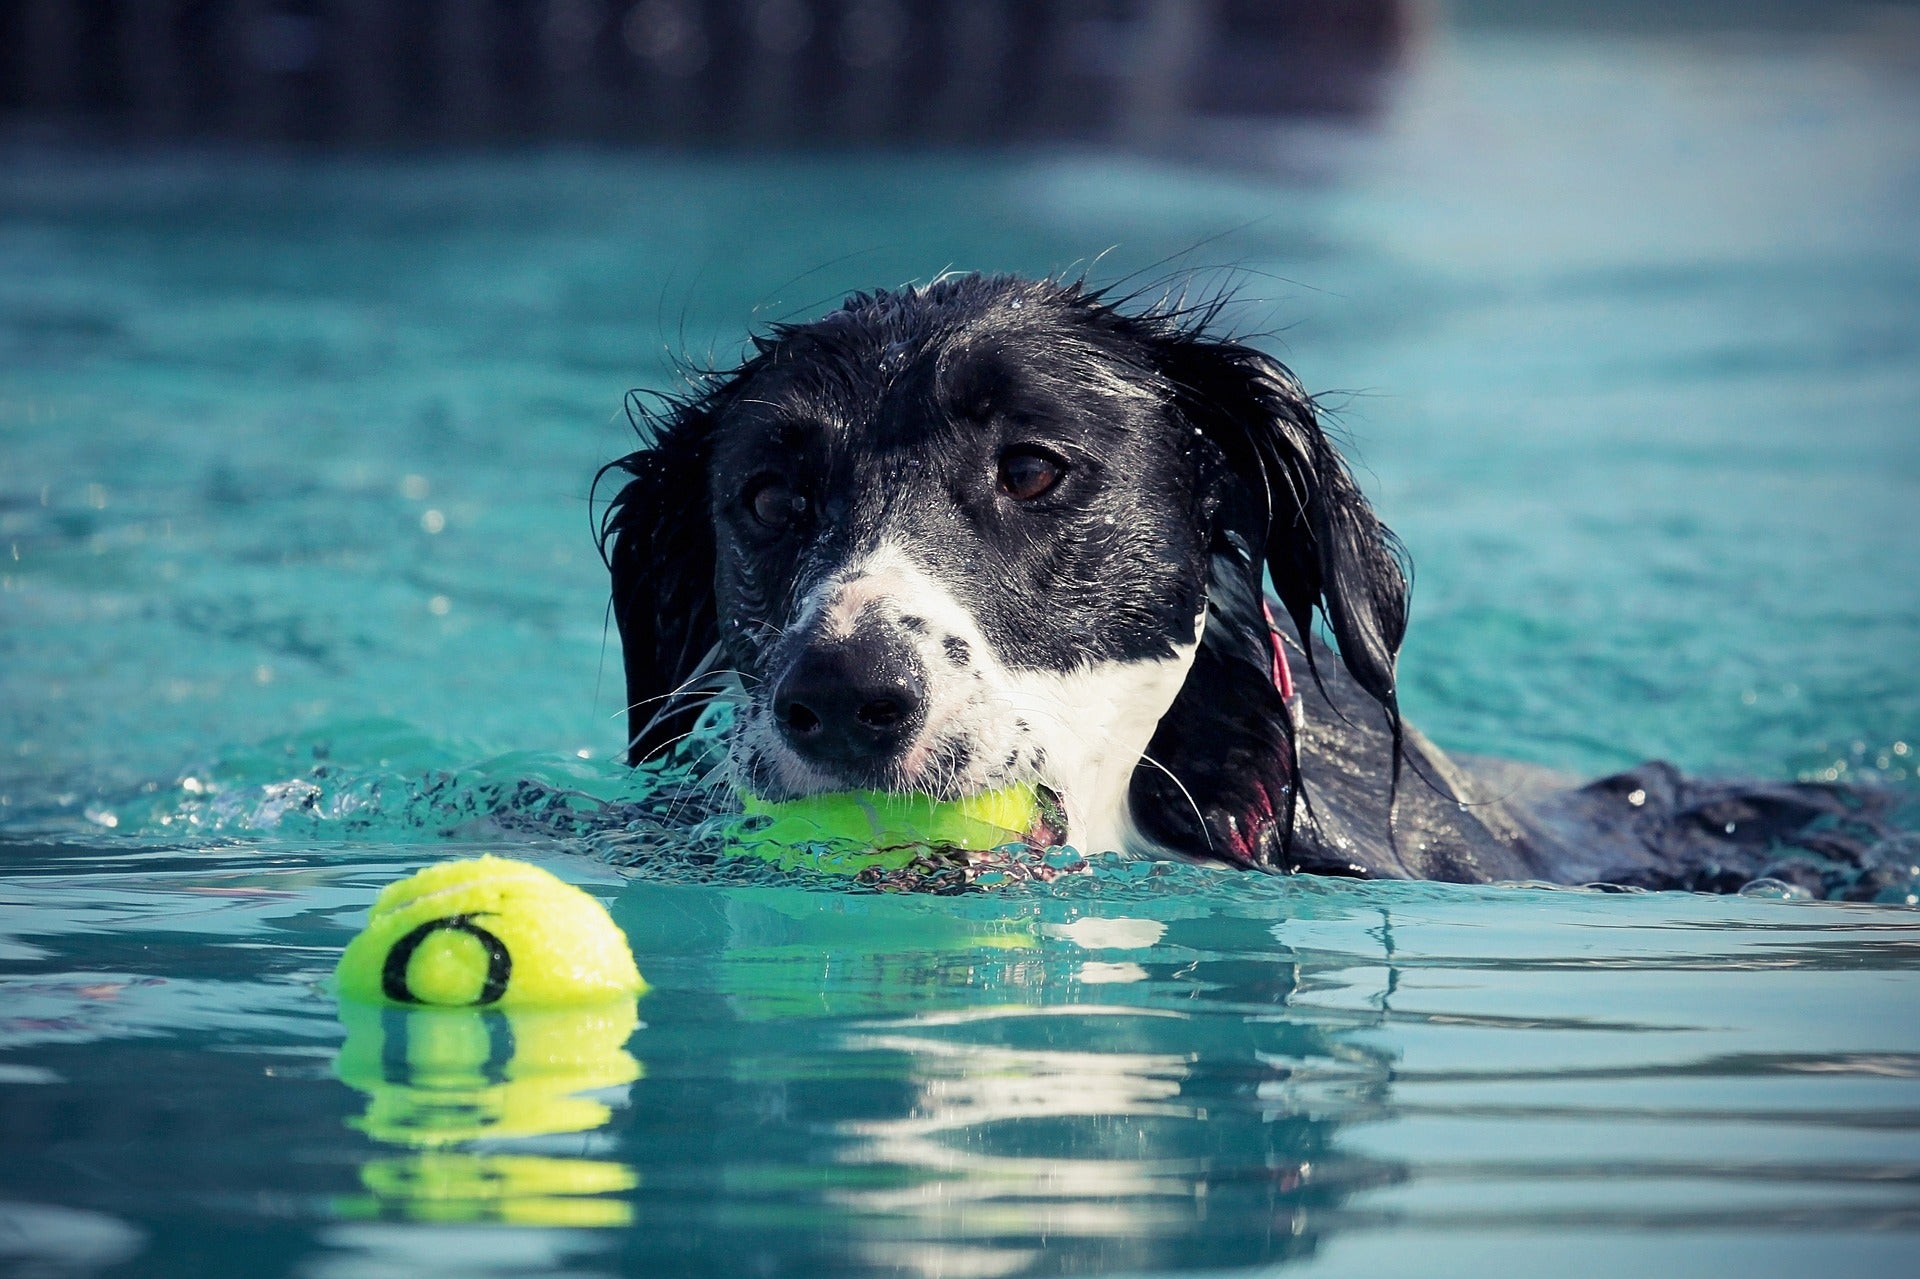 This dog loves to play ball in the water to cool off!